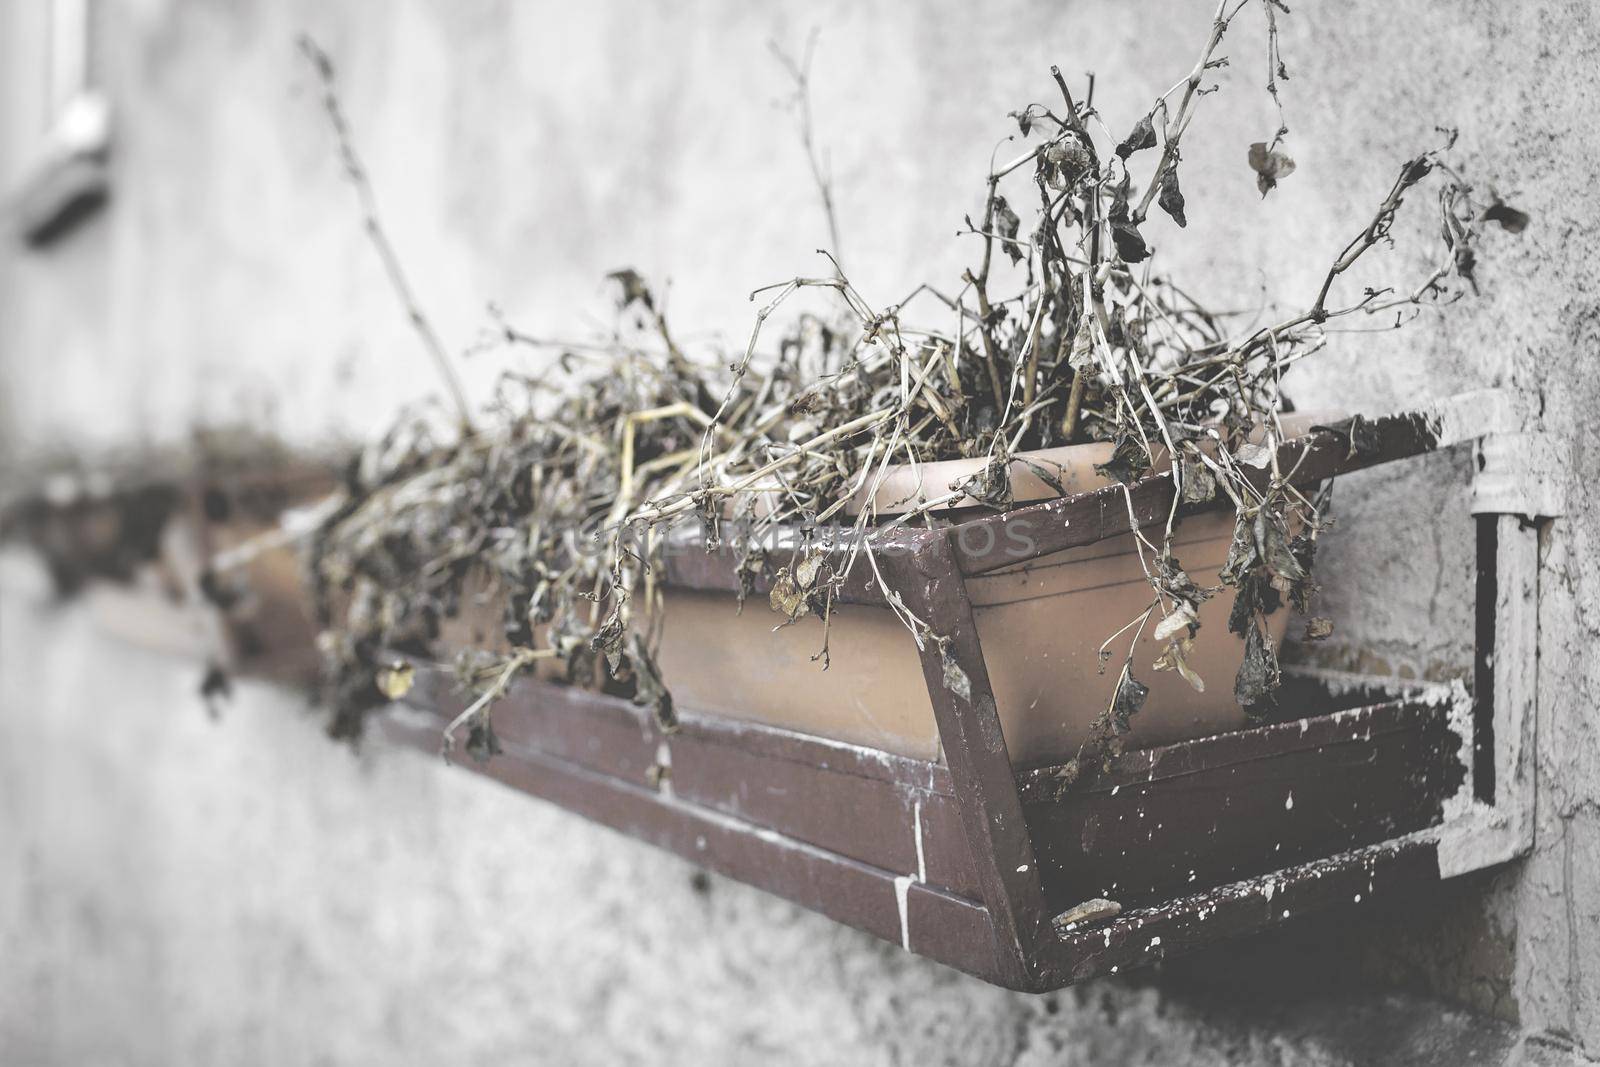 Flowerpots with flowers died. Dead and dry plants in pots on the wall. Retro style photo.